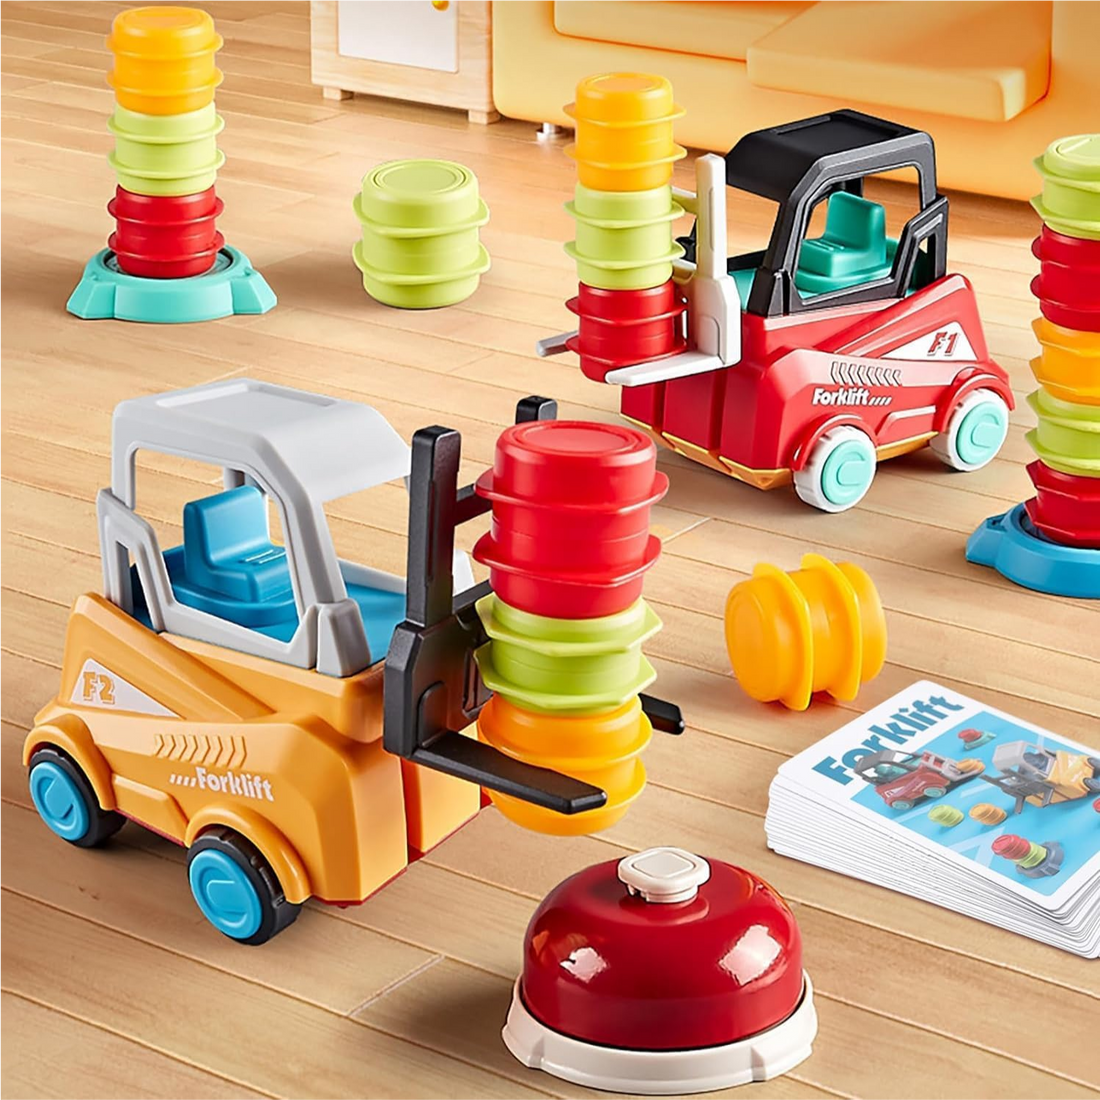 Construction Car Stacking Toy